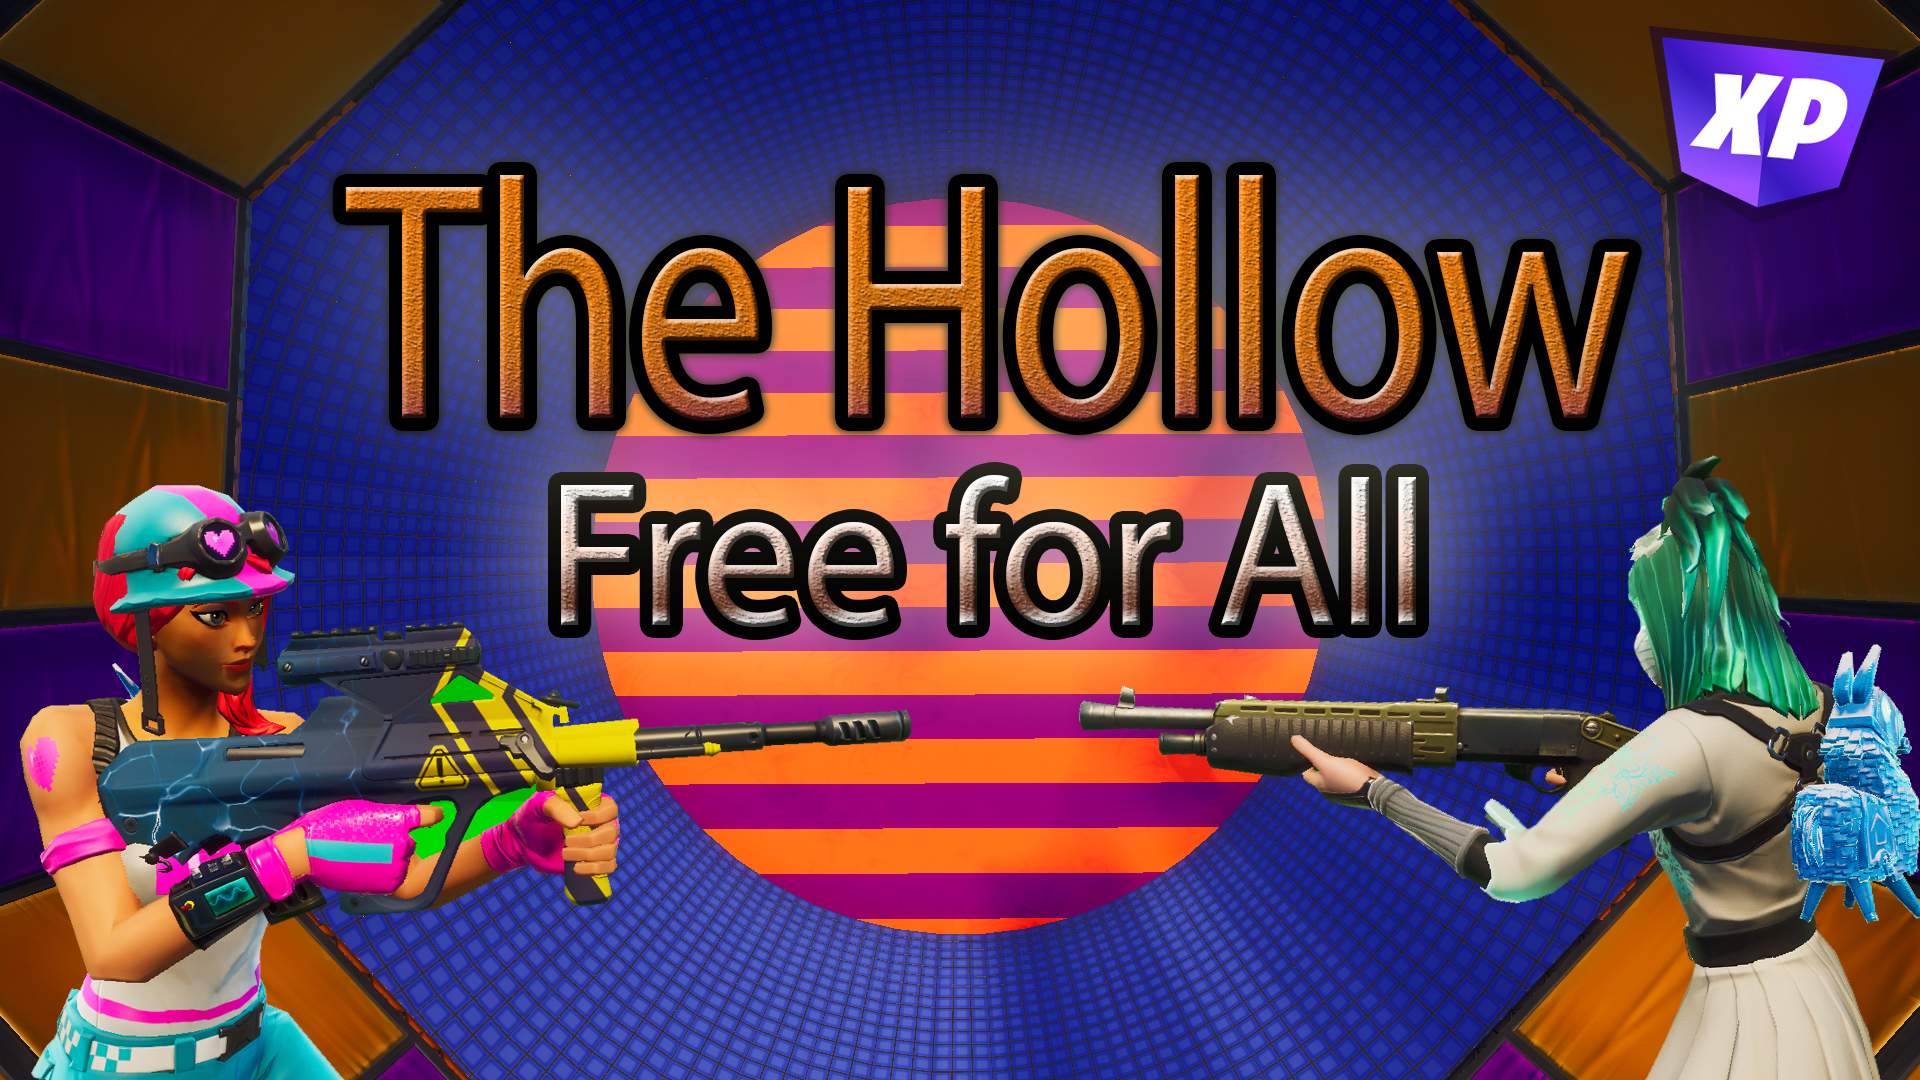 THE HOLLOW - FREE FOR ALL